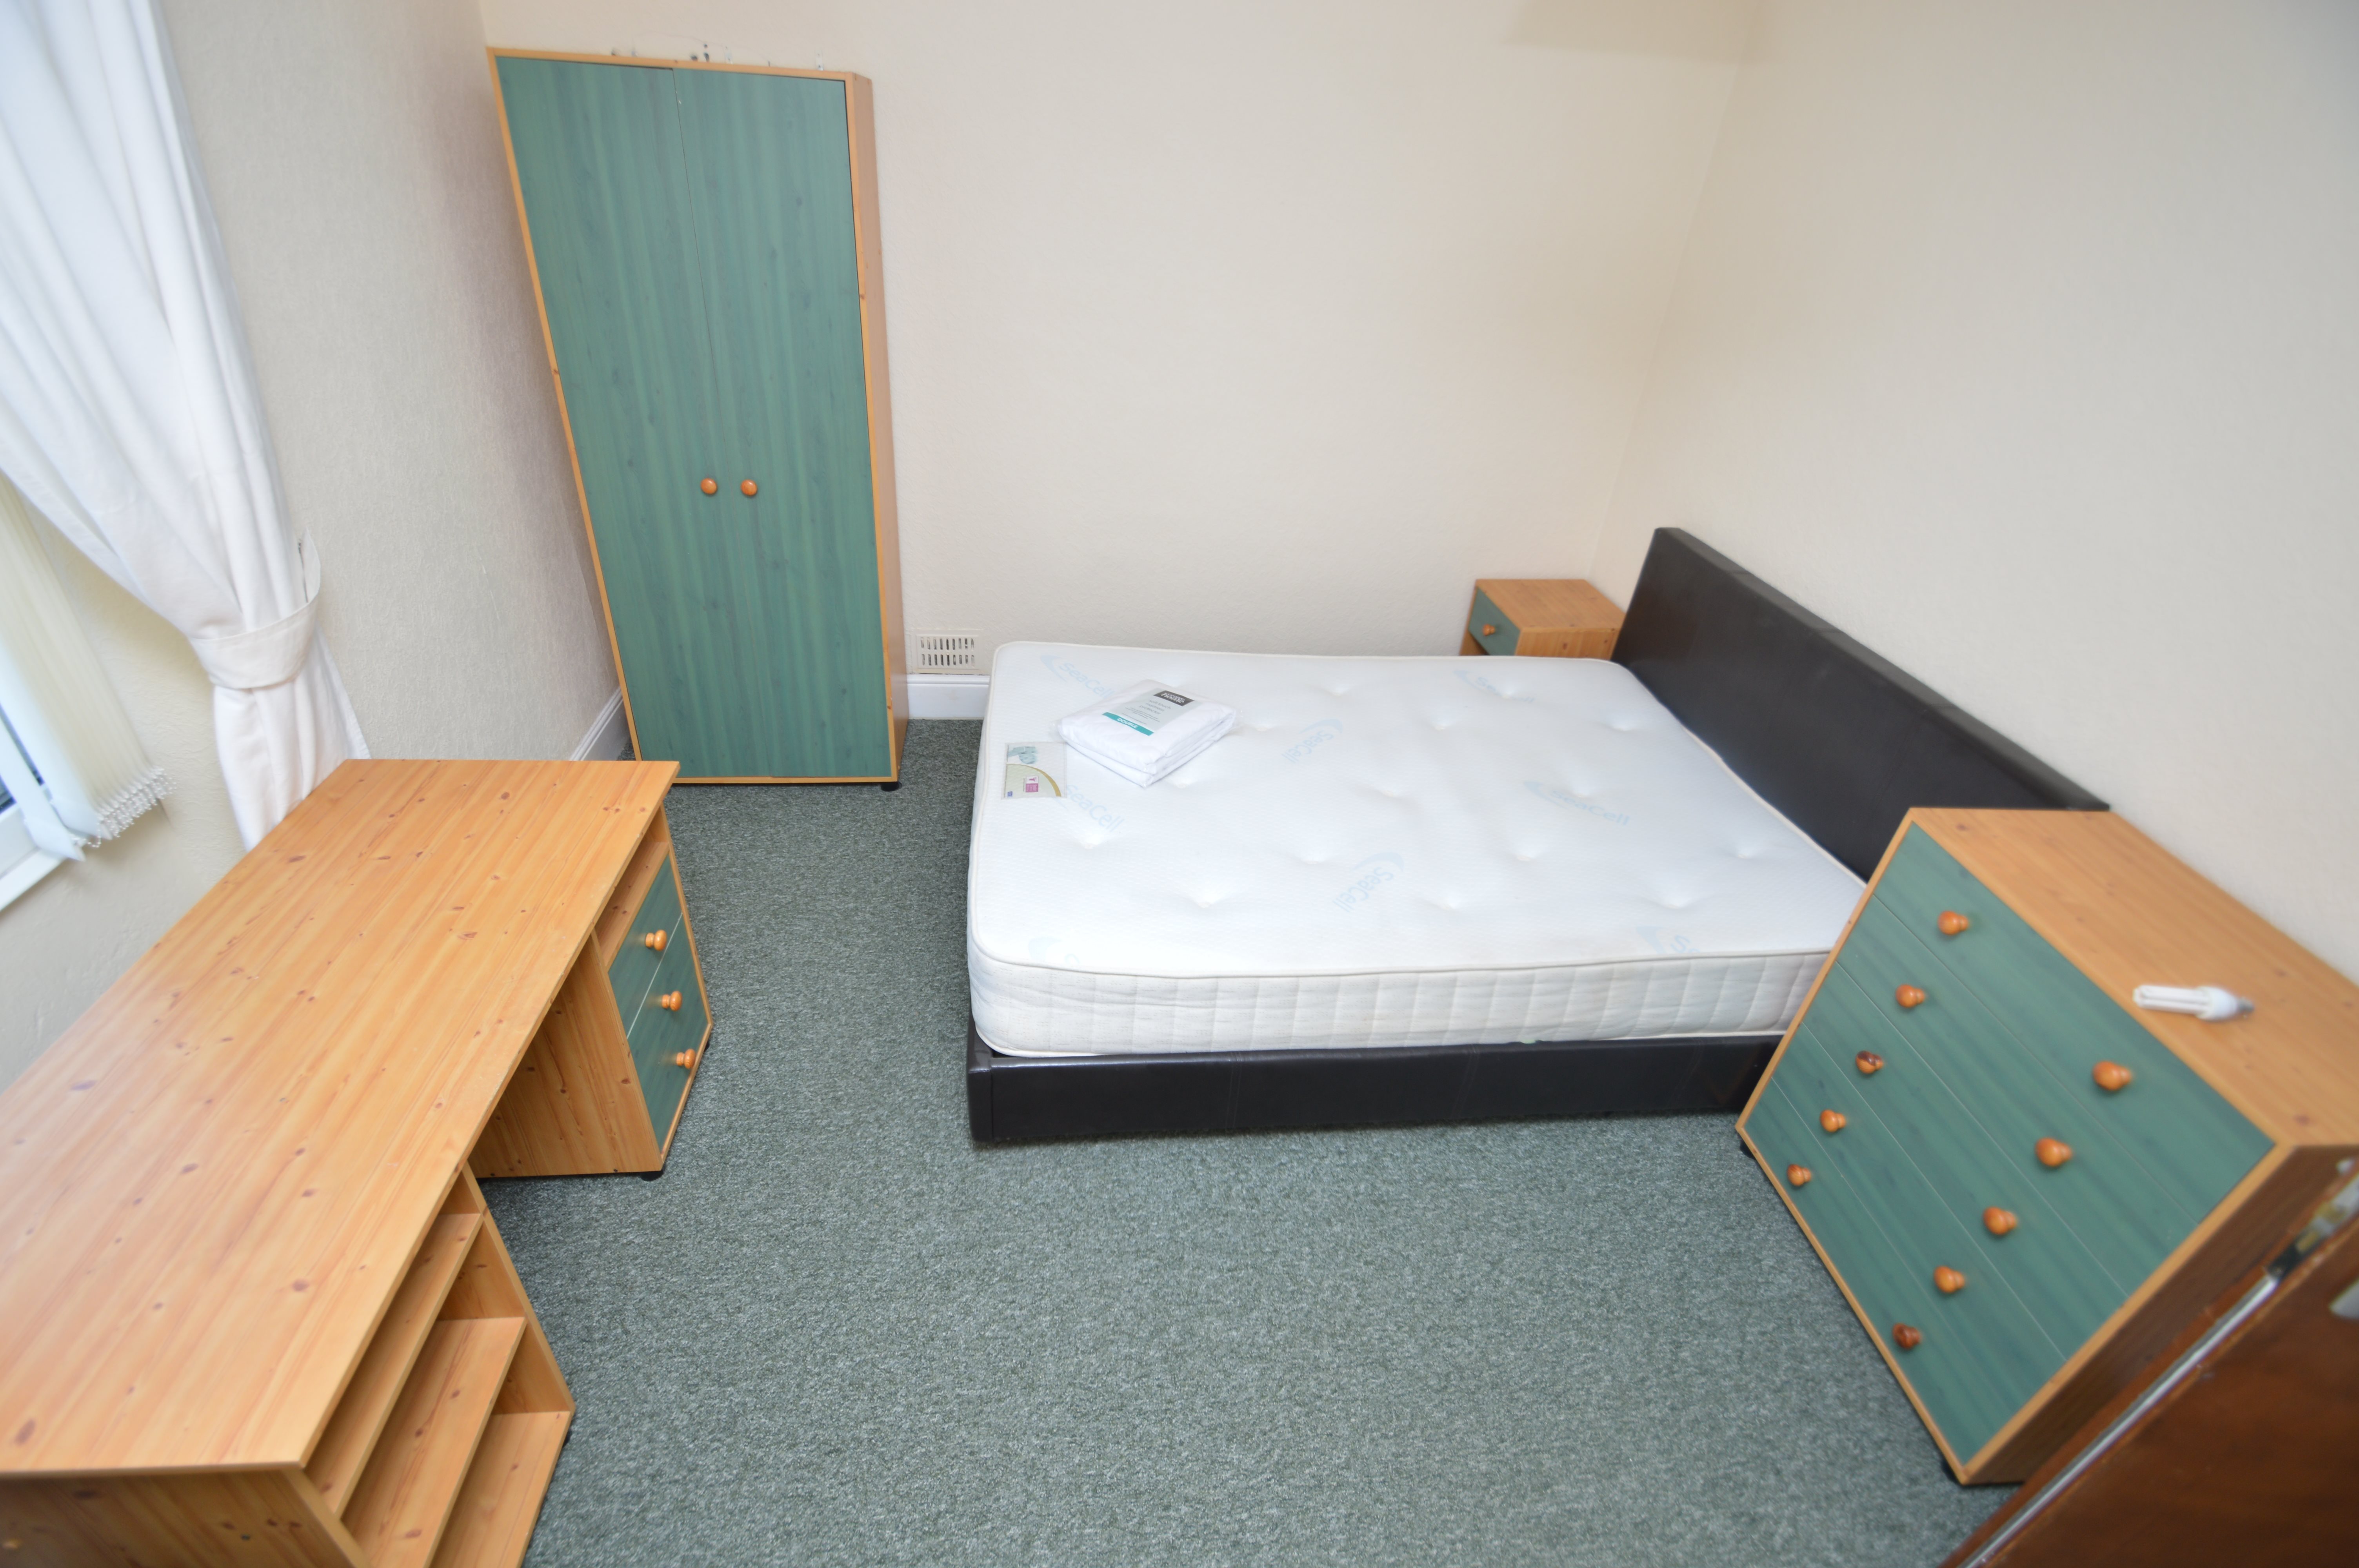 1 bed house / flat share to rent in Wood Road, Treforest 0